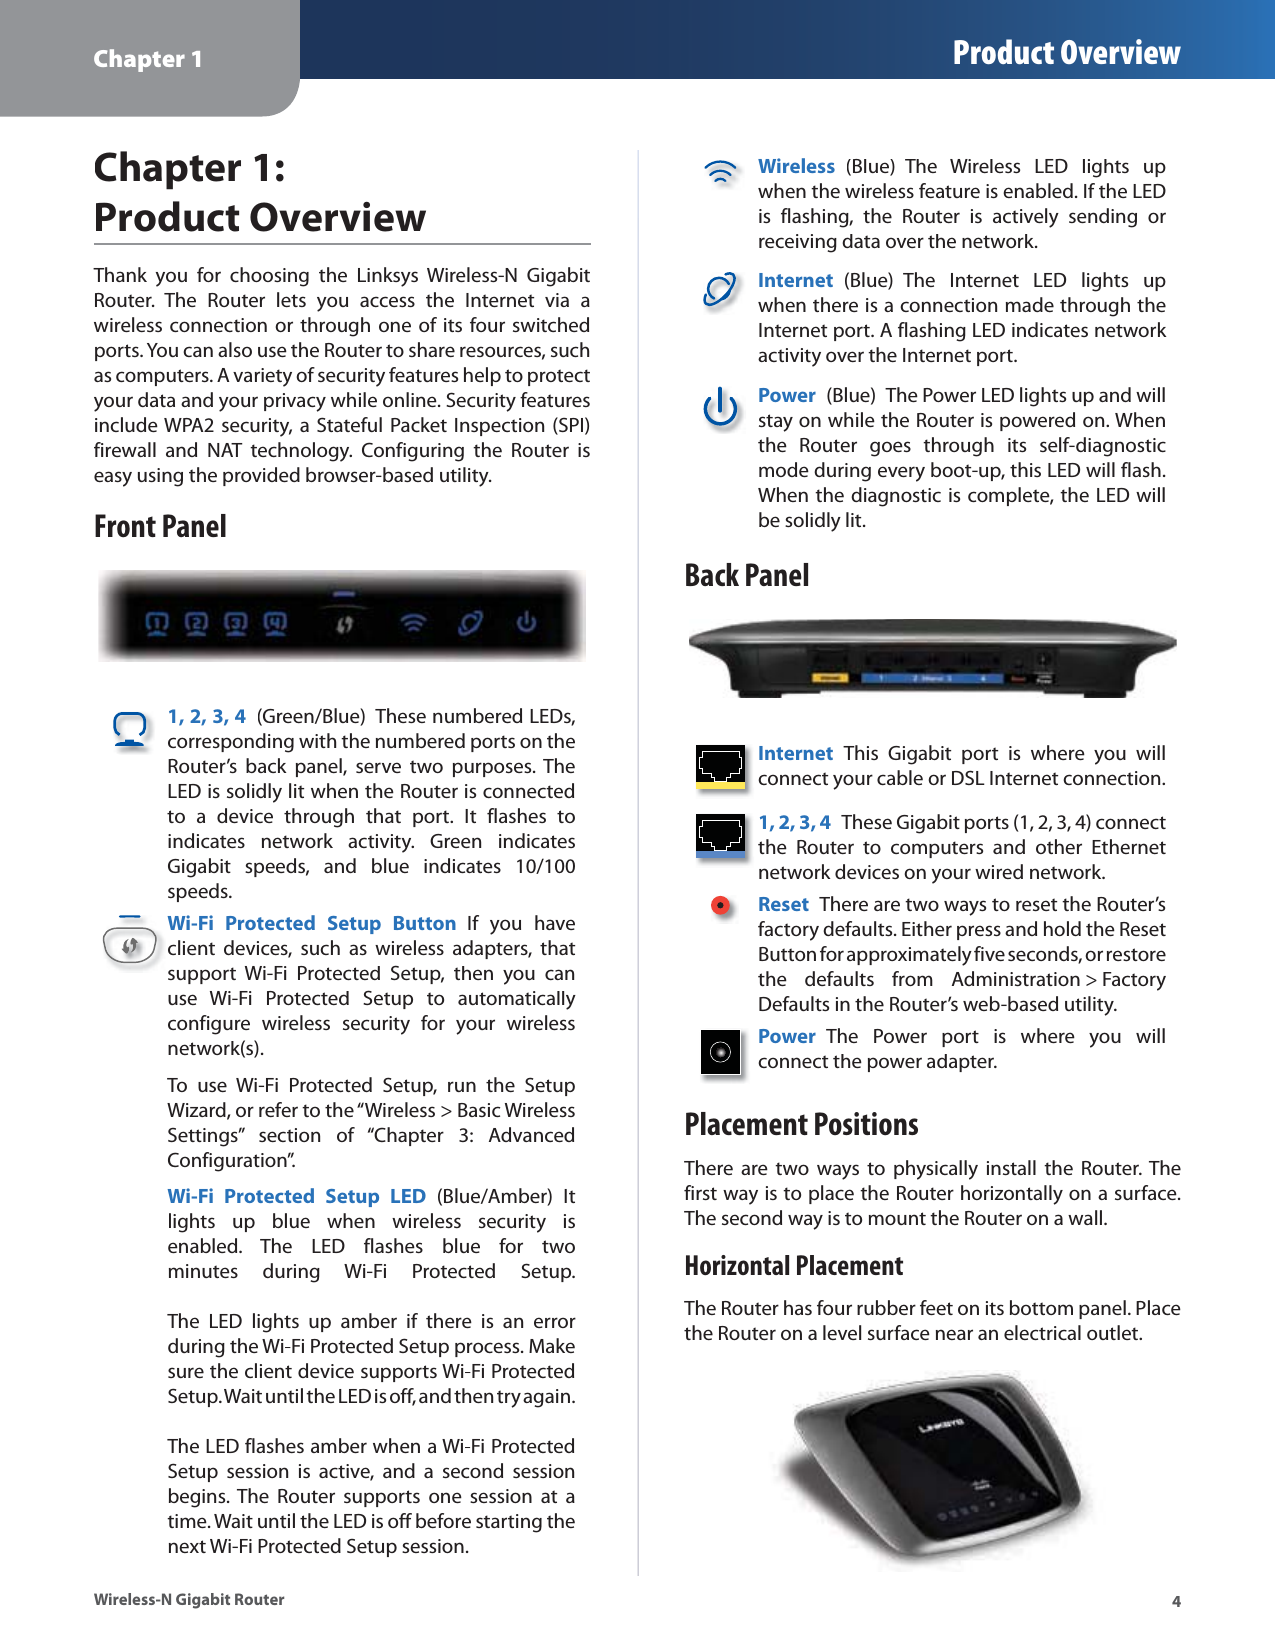 Chapter 1 Product Overview4Wireless-N Gigabit RouterChapter 1:  Product OverviewThank you for choosing the Linksys Wireless-N GigabitRouter. The Router lets you access the Internet via awireless connection or through one of its four switchedports. You can also use the Router to share resources, suchas computers. A variety of security features help to protectyour data and your privacy while online. Security featuresinclude WPA2 security, a Stateful Packet Inspection (SPI)firewall and NAT technology. Configuring the Router iseasy using the provided browser-based utility.Front Panel1, 2, 3, 4(Green/Blue)These numbered LEDs,corresponding with the numbered ports on theRouter’s back panel, serve two purposes. TheLED is solidly lit when the Router is connectedto a device through that port. It flashes toindicates network activity. Green indicatesGigabit speeds, and blue indicates 10/100speeds.Wi-Fi Protected Setup ButtonIf you haveclient devices, such as wireless adapters, thatsupport Wi-Fi Protected Setup, then you canuse Wi-Fi Protected Setup to automaticallyconfigure wireless security for your wirelessnetwork(s).To use Wi-Fi Protected Setup, run the SetupWizard, or refer to the “Wireless &gt; Basic WirelessSettings” section of “Chapter 3: AdvancedConfiguration”.Wi-Fi Protected Setup LED (Blue/Amber)Itlights up blue when wireless security isenabled. The LED flashes blue for twominutes during Wi-Fi Protected Setup.The LED lights up amber if there is an errorduring the Wi-Fi Protected Setup process. Makesure the client device supports Wi-Fi Protected Setup. Wait until the LED is off, and then try again.The LED flashes amber when a Wi-Fi Protected Setup session is active, and a second sessionbegins. The Router supports one session at atime. Wait until the LED is off before starting thenext Wi-Fi Protected Setup session.Wireless(Blue)The Wireless LED lights upwhen the wireless feature is enabled. If the LEDis flashing, the Router is actively sending orreceiving data over the network.Internet(Blue)The Internet LED lights upwhen there is a connection made through theInternet port. A flashing LED indicates network activity over the Internet port.Power (Blue)The Power LED lights up and willstay on while the Router is powered on. Whenthe Router goes through its self-diagnosticmode during every boot-up, this LED will flash.When the diagnostic is complete, the LED willbe solidly lit.Back PanelInternetThis Gigabit port is where you willconnect your cable or DSL Internet connection.1, 2, 3, 4These Gigabit ports (1, 2, 3, 4) connectthe Router to computers and other Ethernetnetwork devices on your wired network.ResetThere are two ways to reset the Router’s factory defaults. Either press and hold the ResetButton for approximately five seconds, or restorethe defaults from Administration&gt;FactoryDefaults in the Router’s web-based utility.Power The Power port is where you willconnect the power adapter.Placement PositionsThere are two ways to physically install the Router. Thefirst way is to place the Router horizontally on a surface.The second way is to mount the Router on a wall.Horizontal PlacementThe Router has four rubber feet on its bottom panel. Placethe Router on a level surface near an electrical outlet.